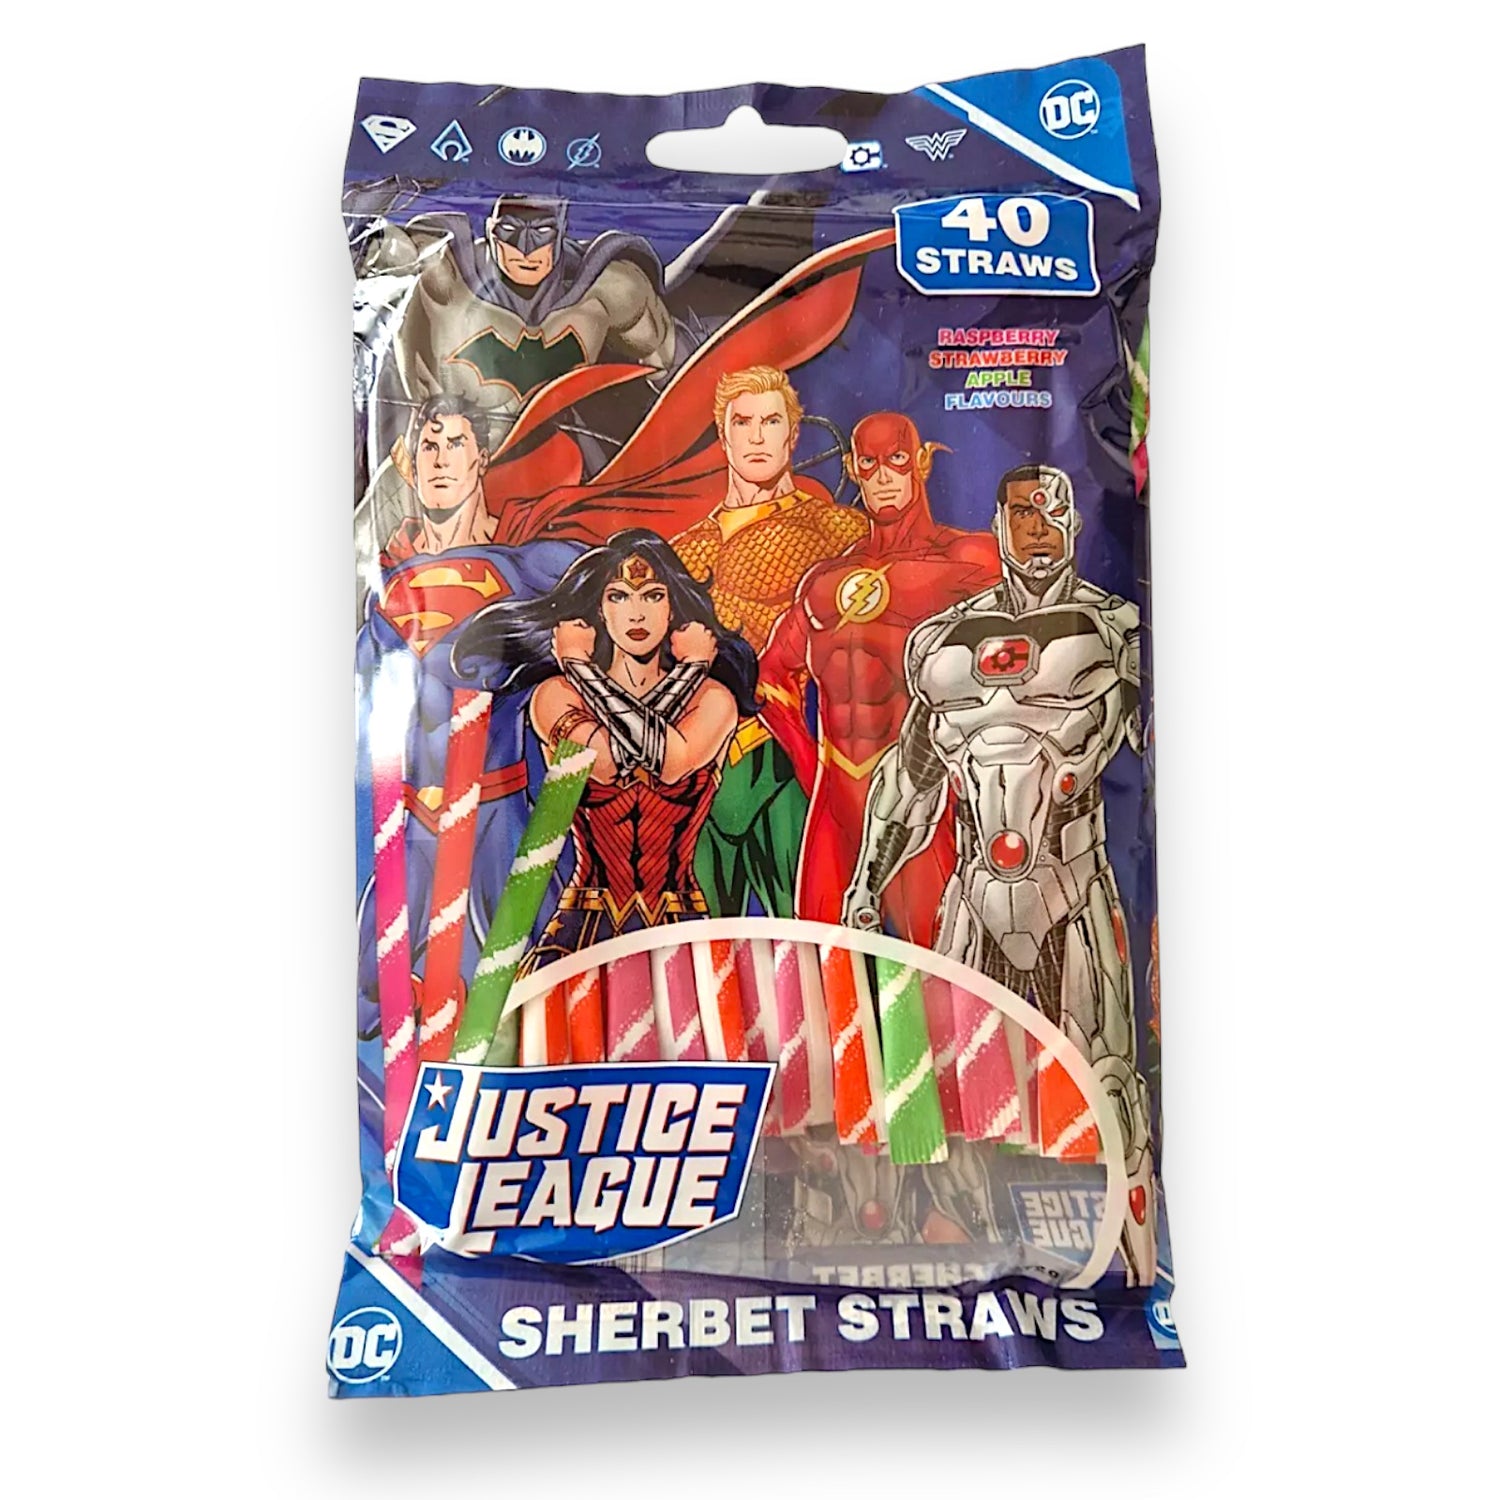 Justice League Sherbet Straws 40 Pack